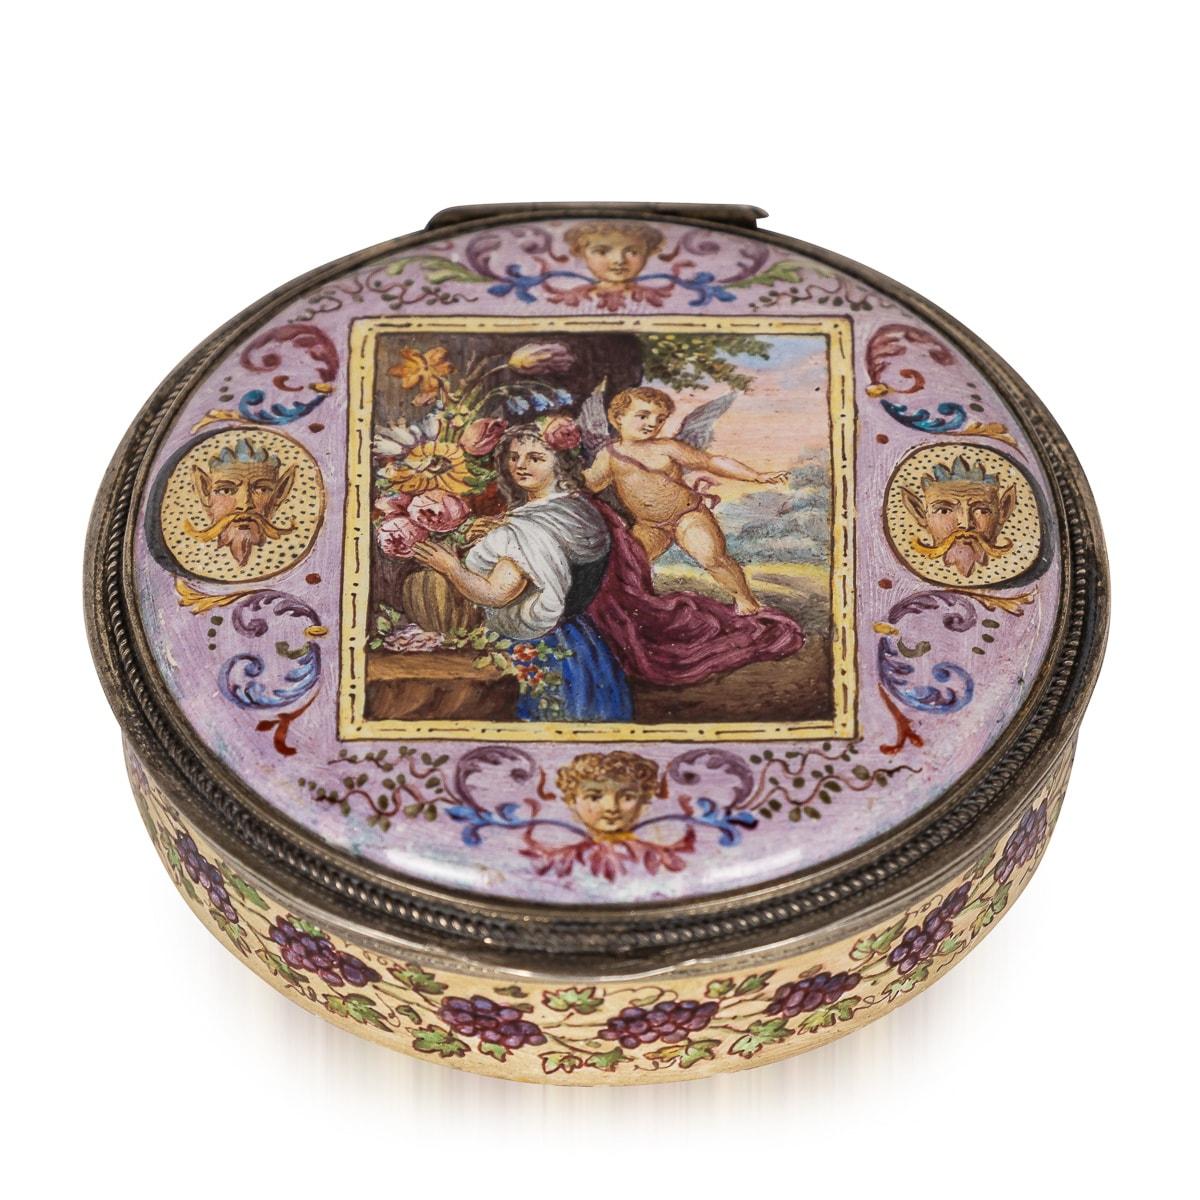 Antique late 19th Century Austrian Renaissance revival solid silver-gilt and enameled trinket box, beautifully enamelled throughout dipicting various mythological scenes. Apparently unmarked.

CONDITION
In Great Condition - Wear expected with age.